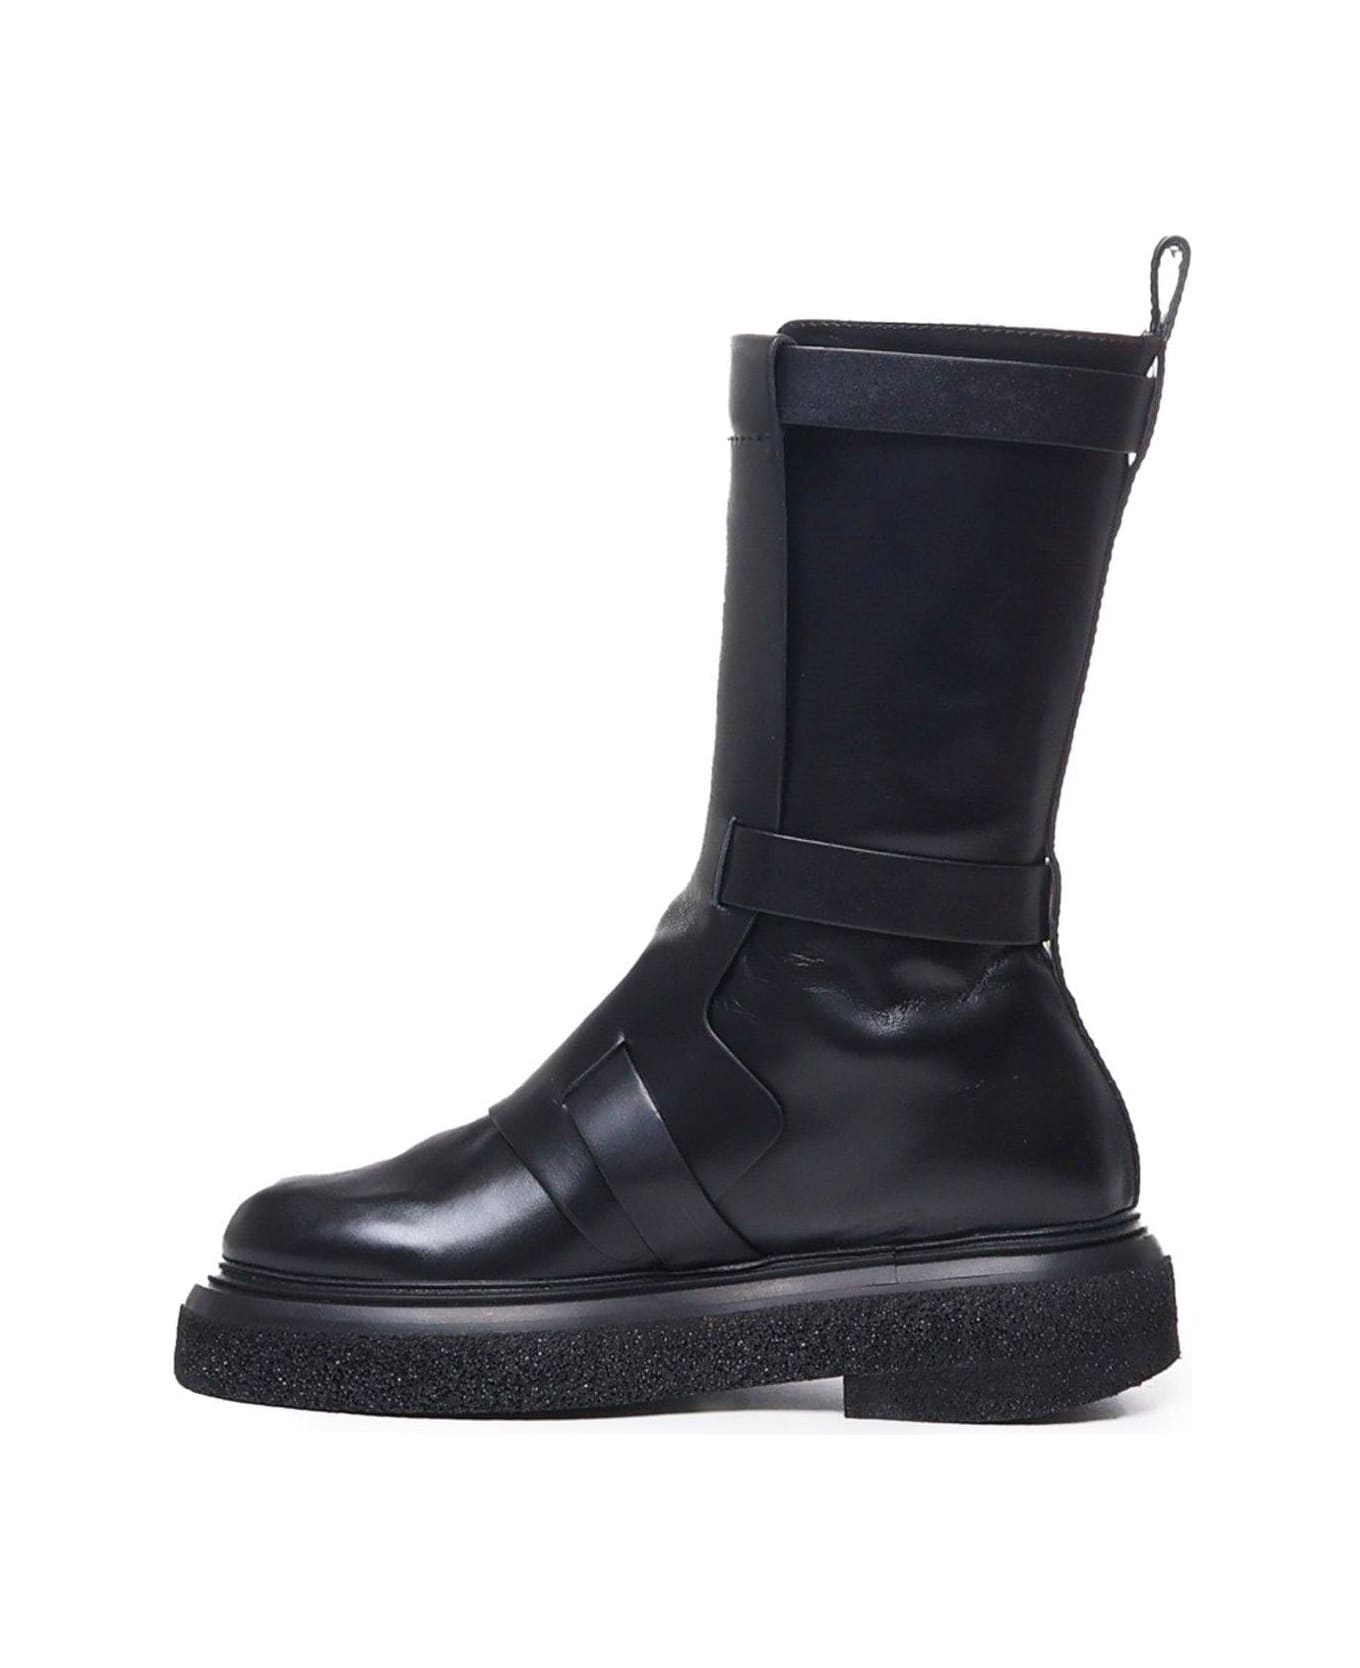 Max Mara Buckled Detailed Round Toe Boots - Black